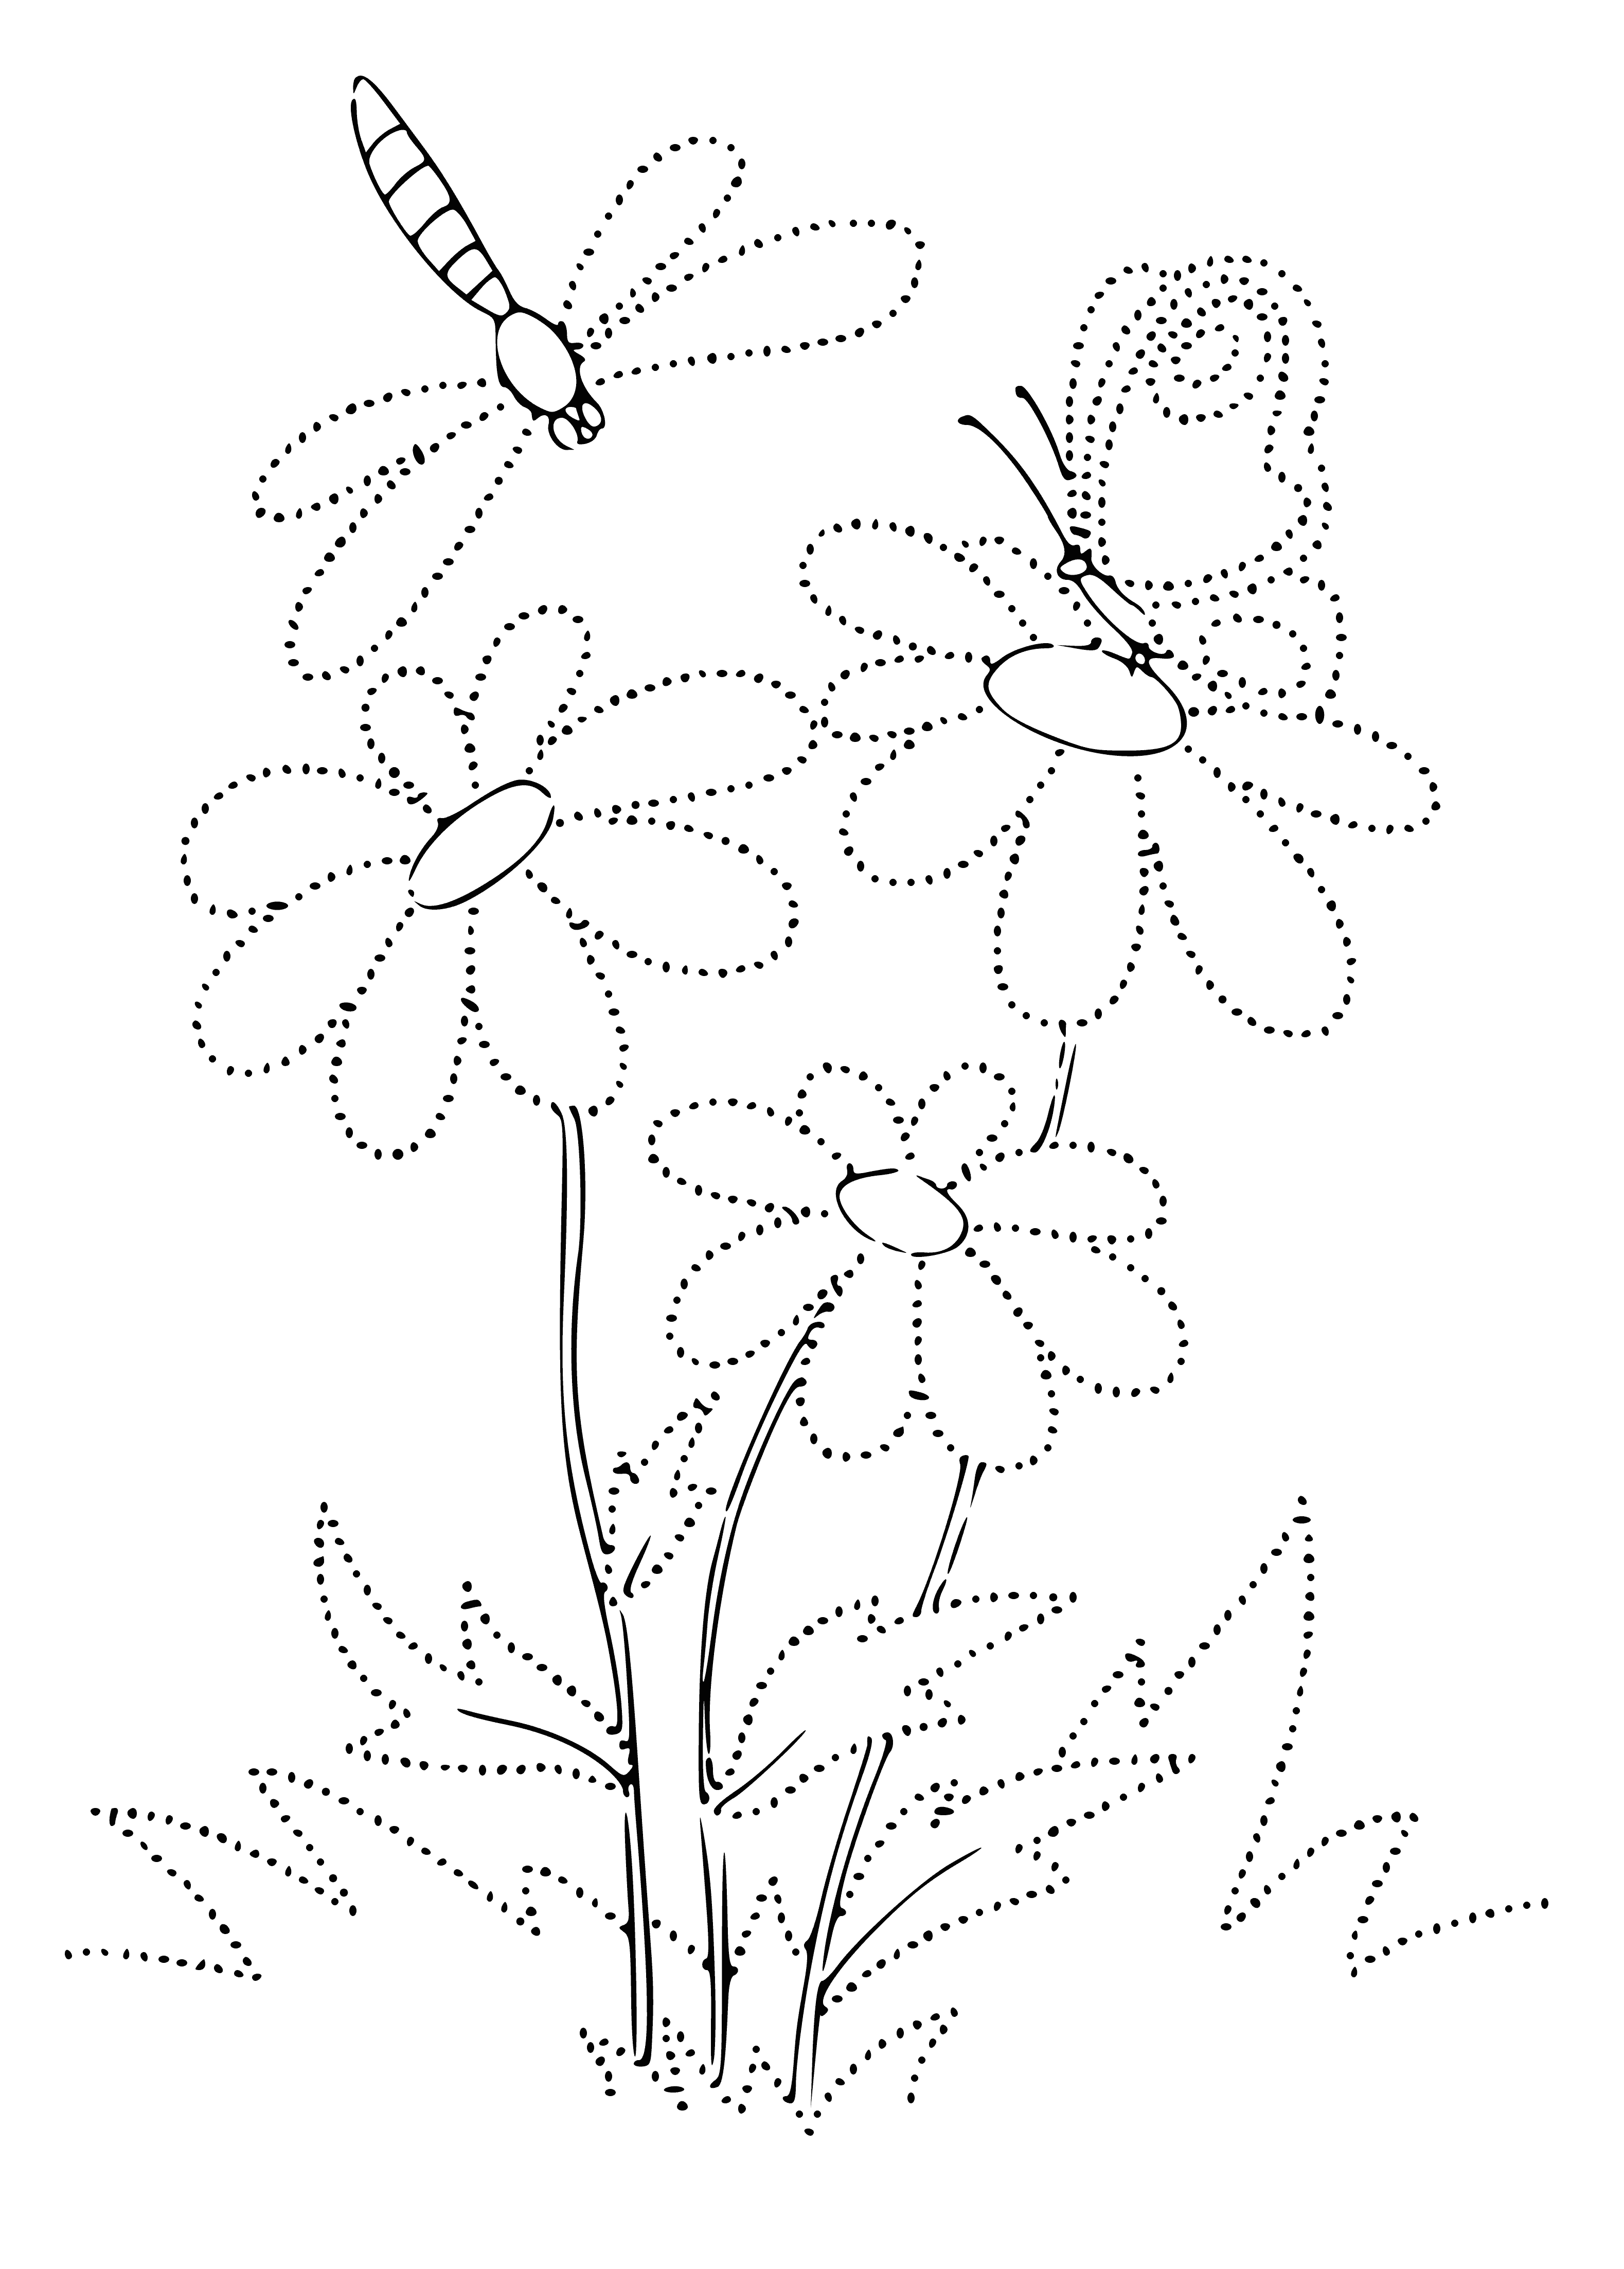 coloring page: Beautiful butterfly on flower - wings of different colors & flower a sunny yellow.